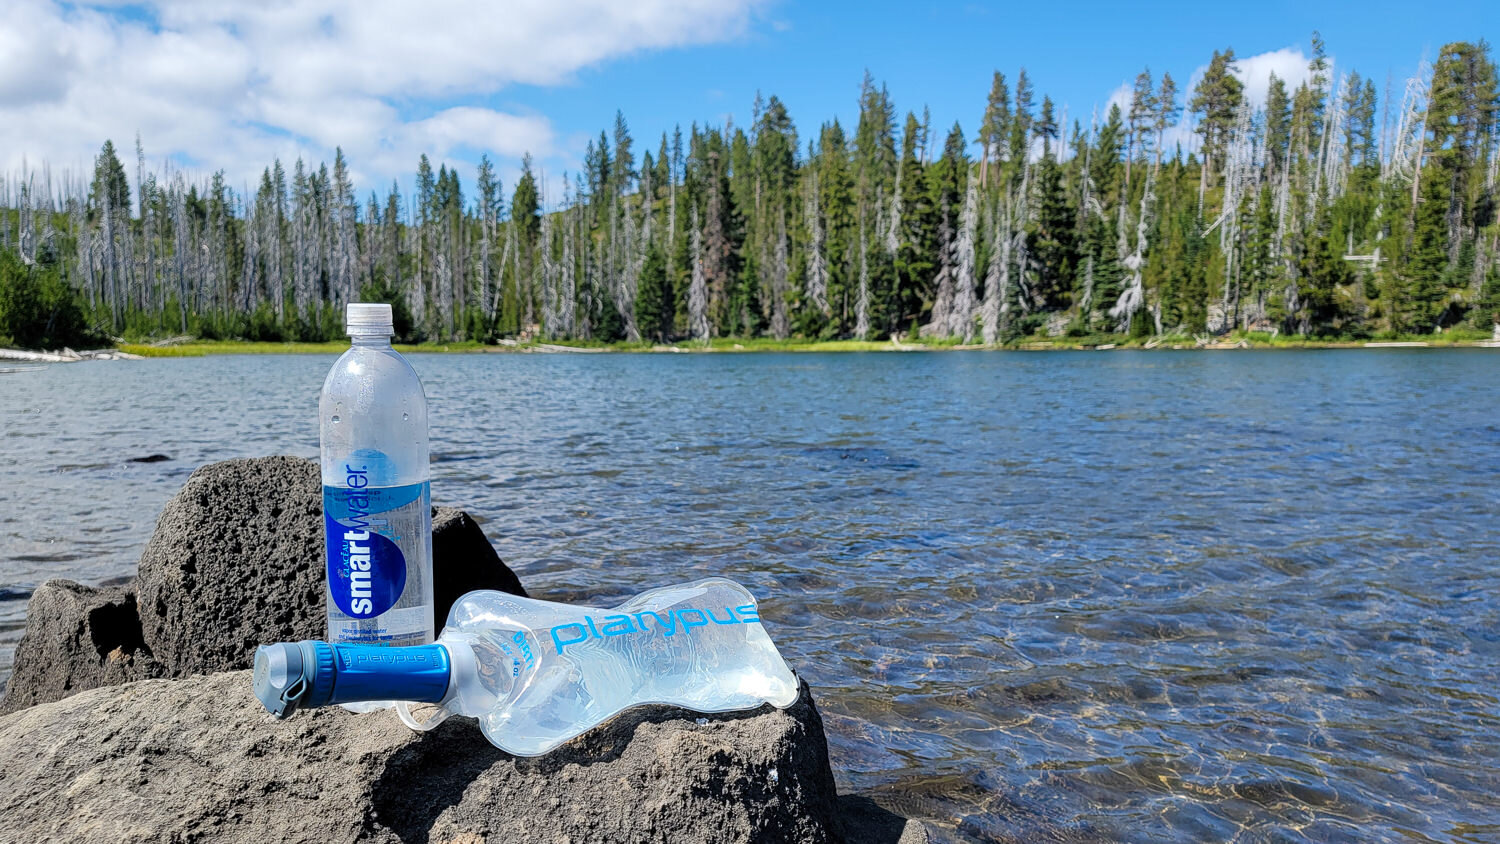 The Platypus QuickDraw Microfilter System & Smartwater bottles are convenient for filtering water from lakes